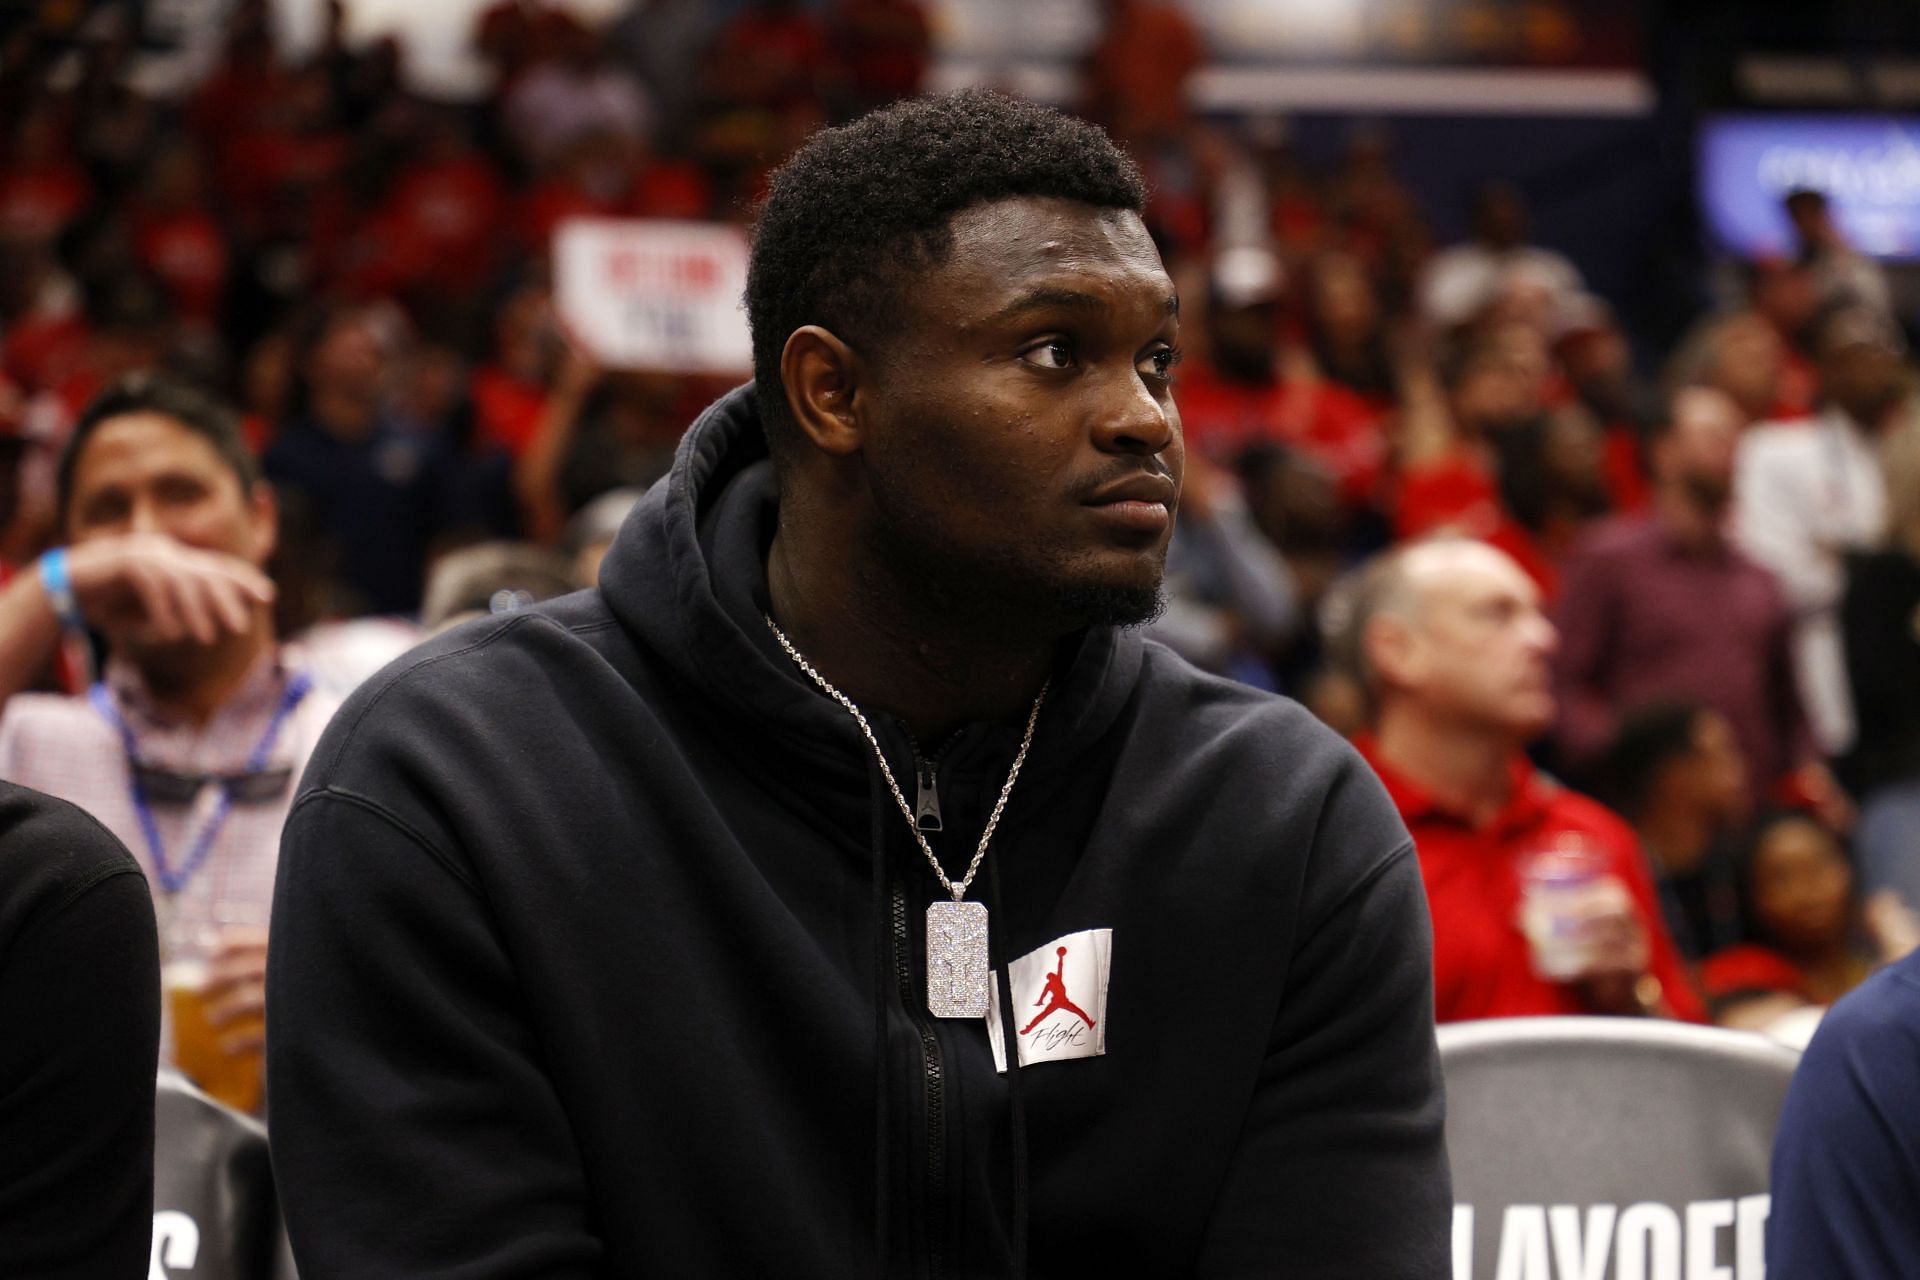 Zion Williamson #1 of the New Orleans Pelicans looks on during the game against the Phoenix Suns at Smoothie King Center on April 28, 2022 in New Orleans, Louisiana.